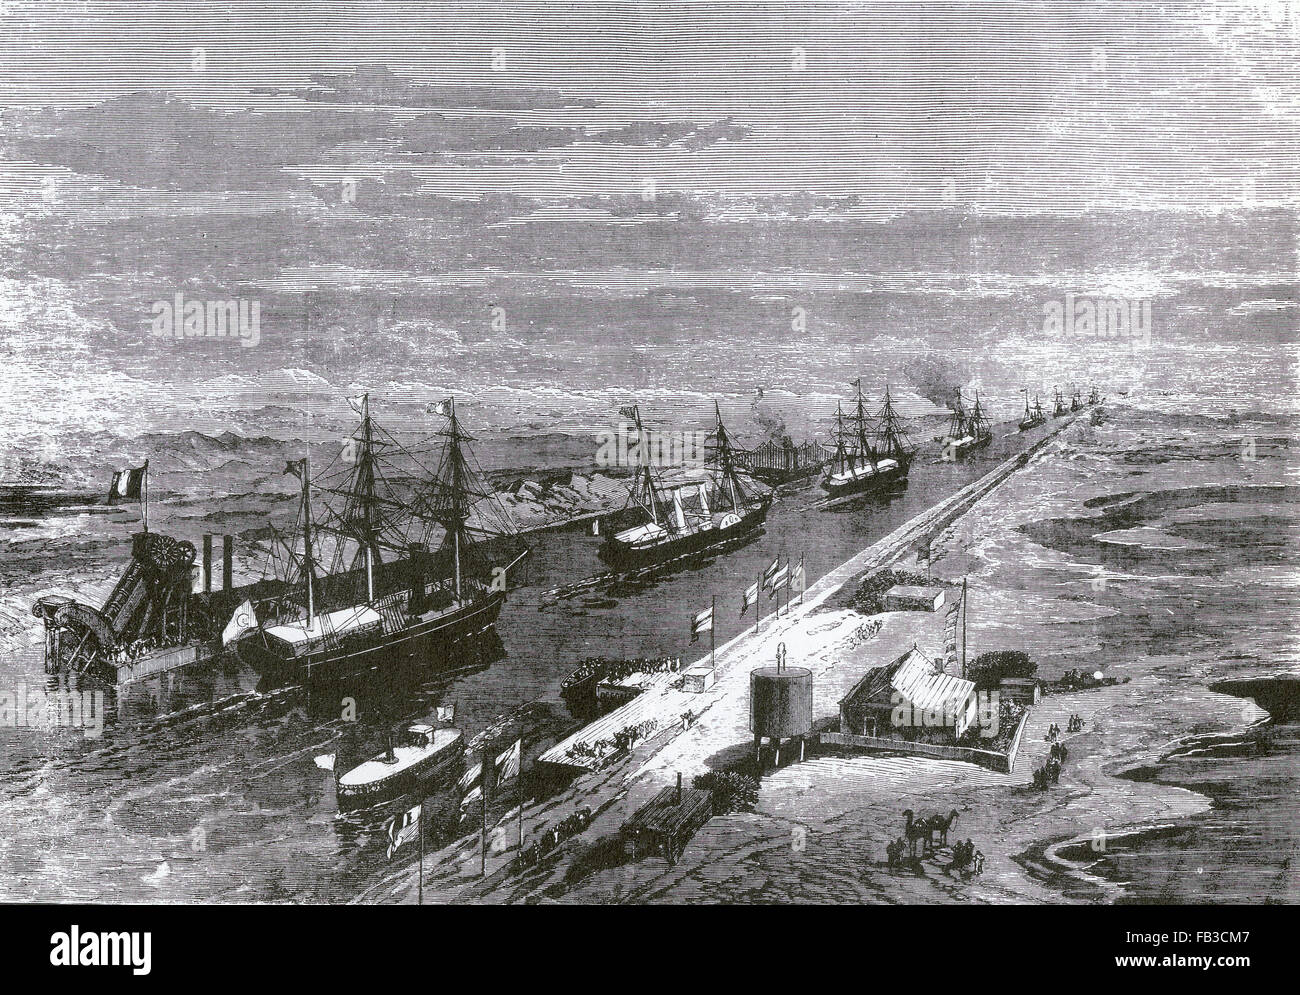 Image result for Suez Canal opens in 1869